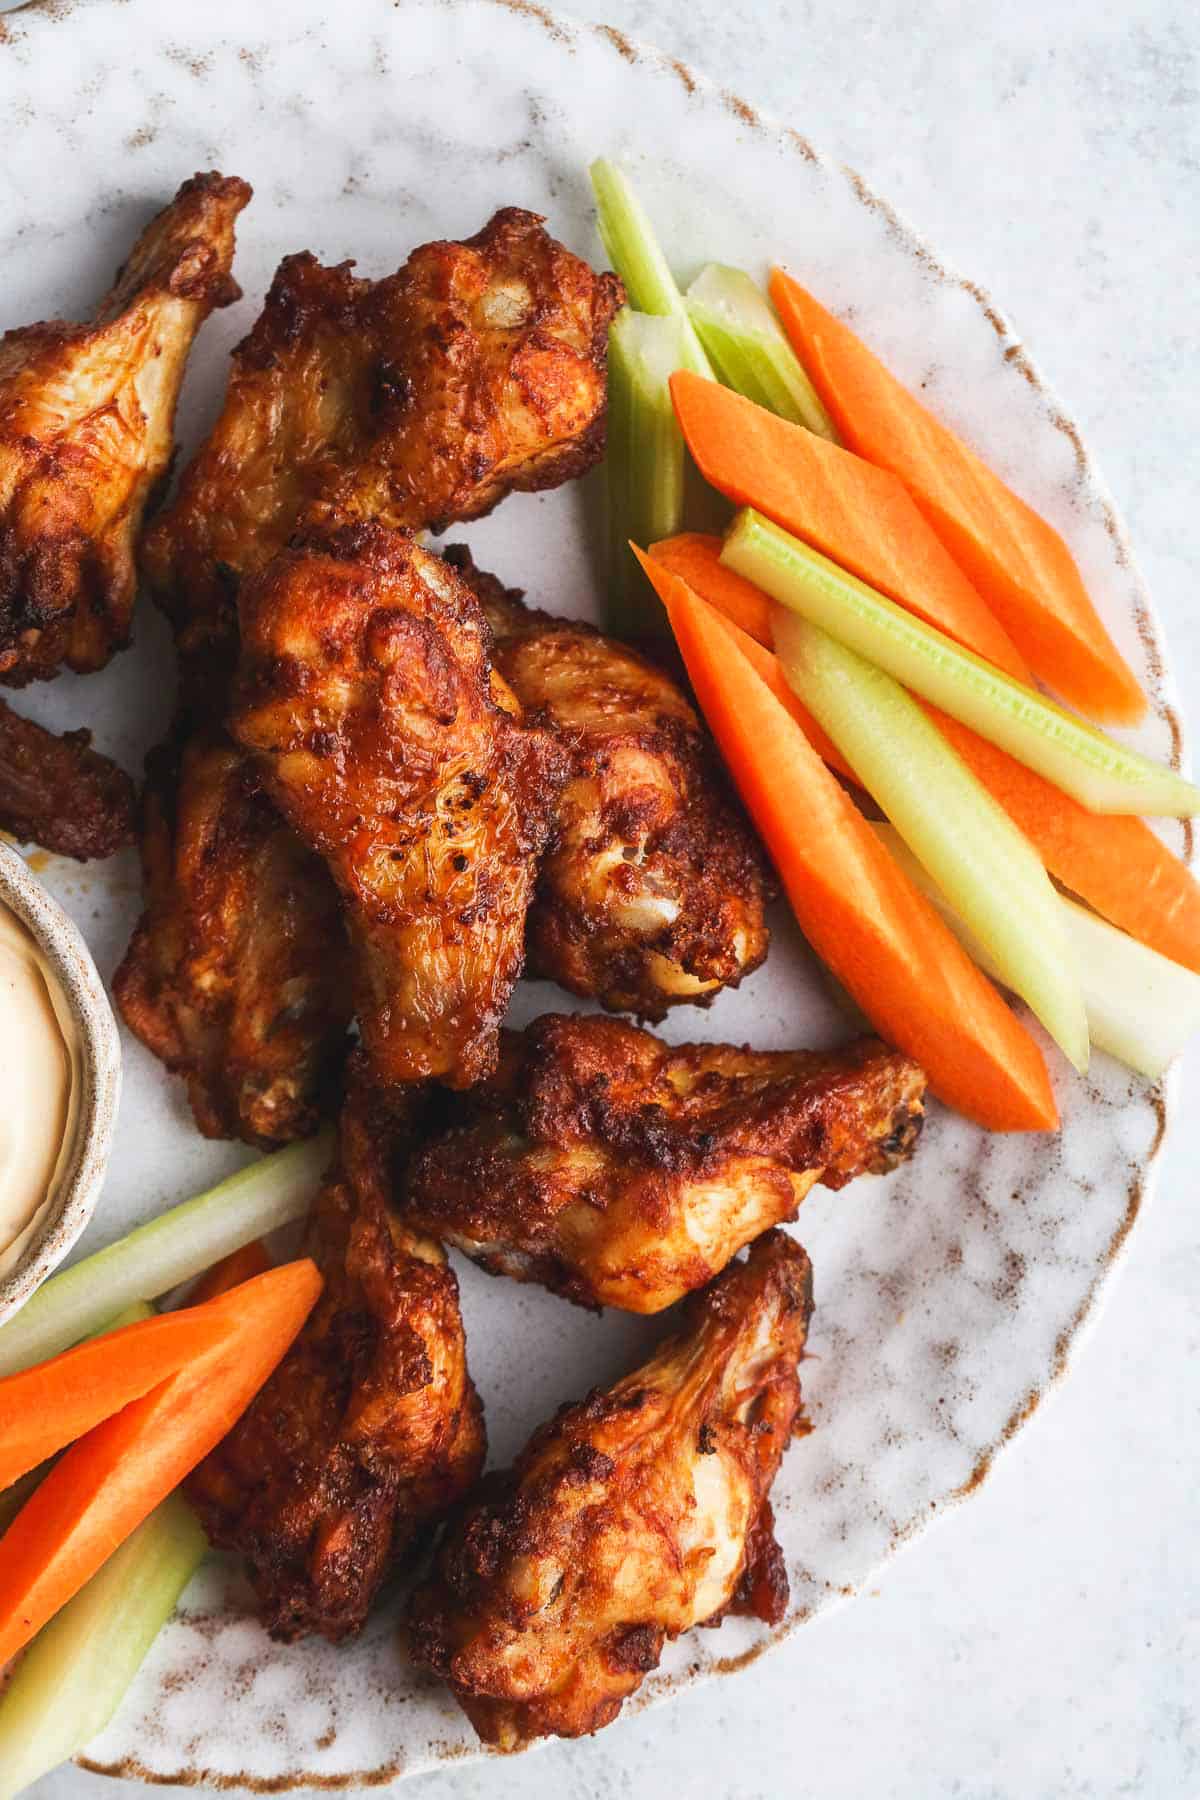 Crispy chicken wings in a plate, with carrot and celery sticks.